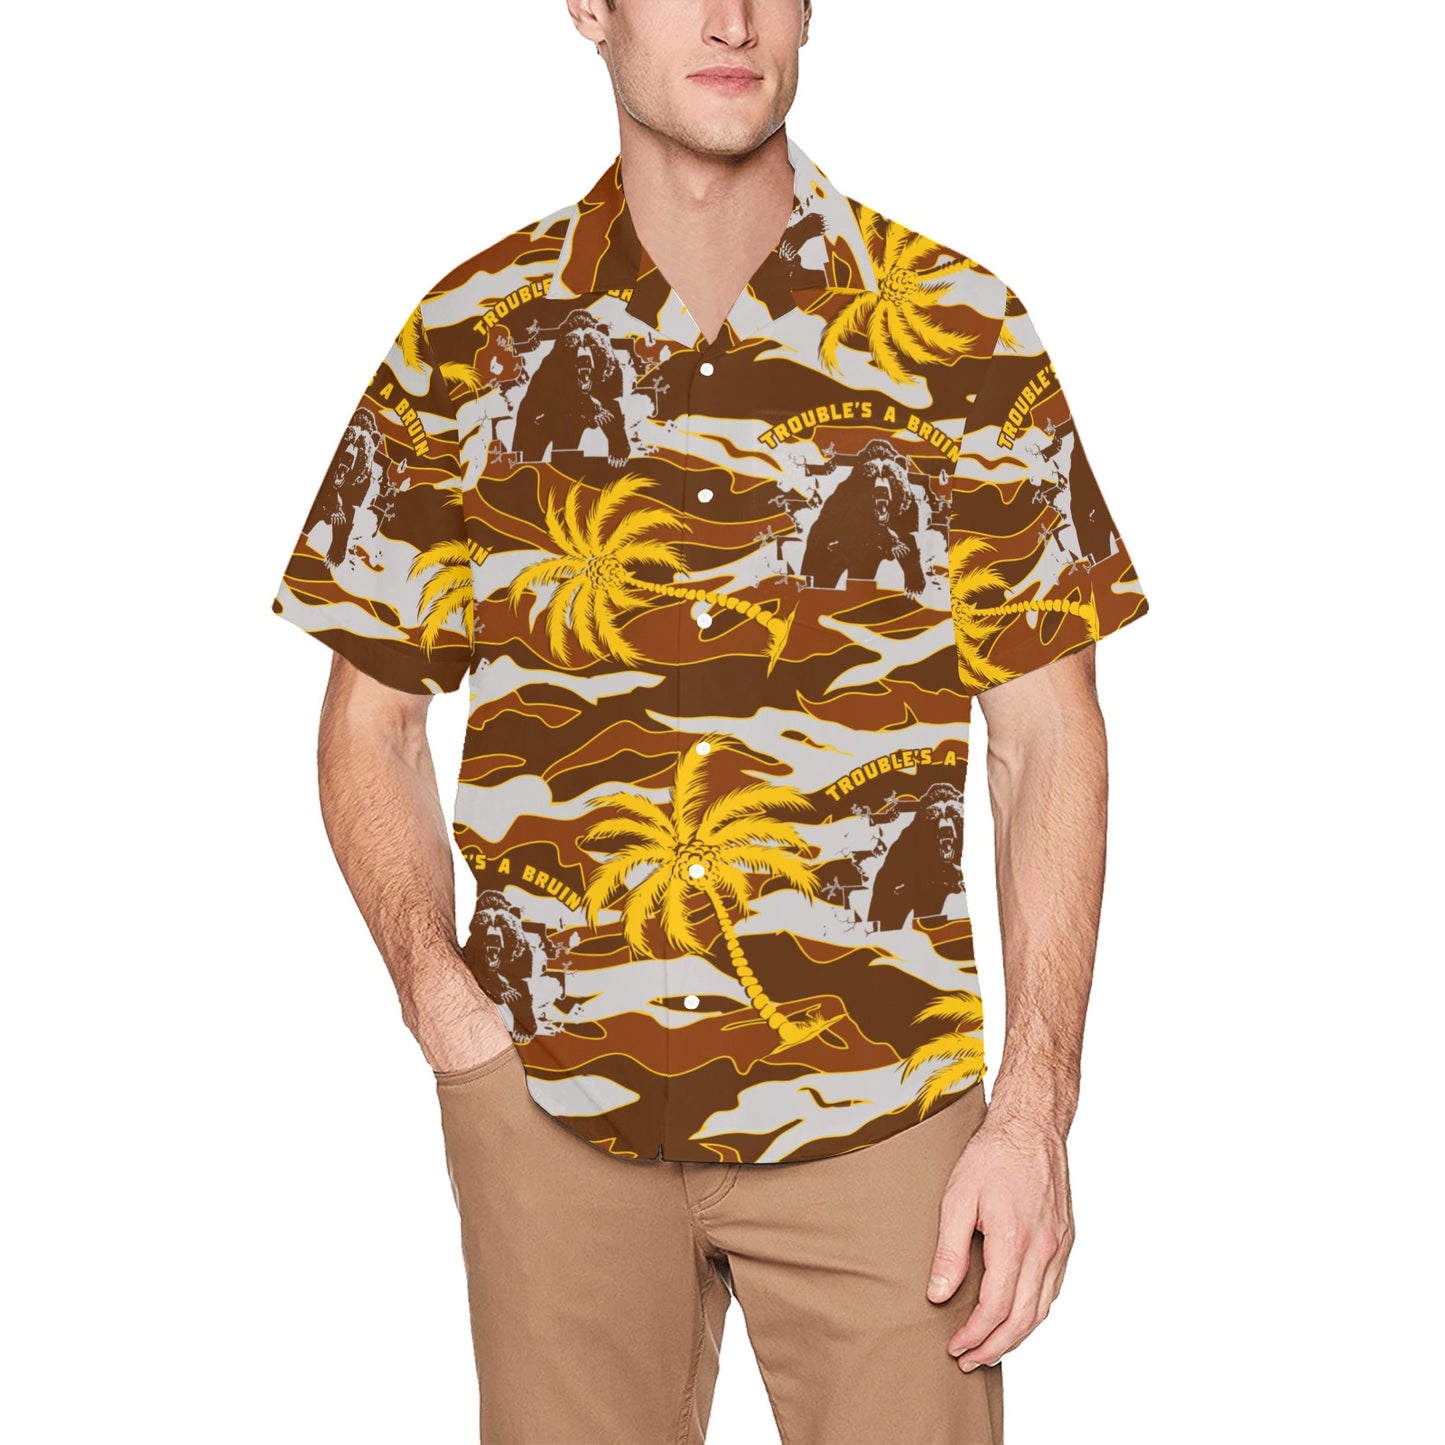 Fargo South High Troubles A Bruin Bear Brick Wall Tiger Stripe Brown Camouflage With Gold Color Palm Trees Hawaiian Shirt With Left Chest Pocket